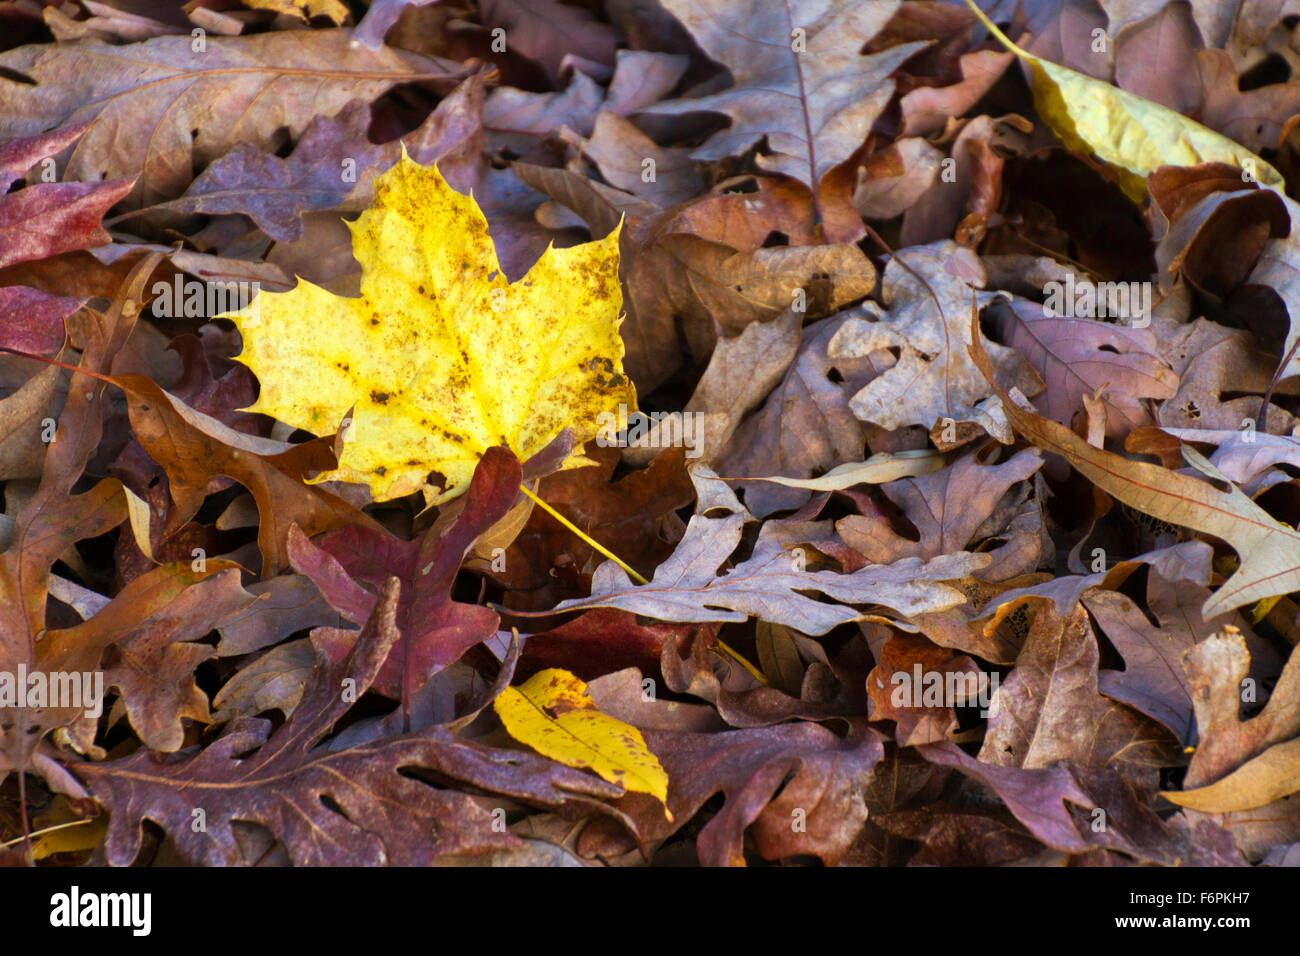 A colorful mix of dry, brown oak tree leaves in autumn with one vivd yellow maple leaf standing out amongst them Stock Photo